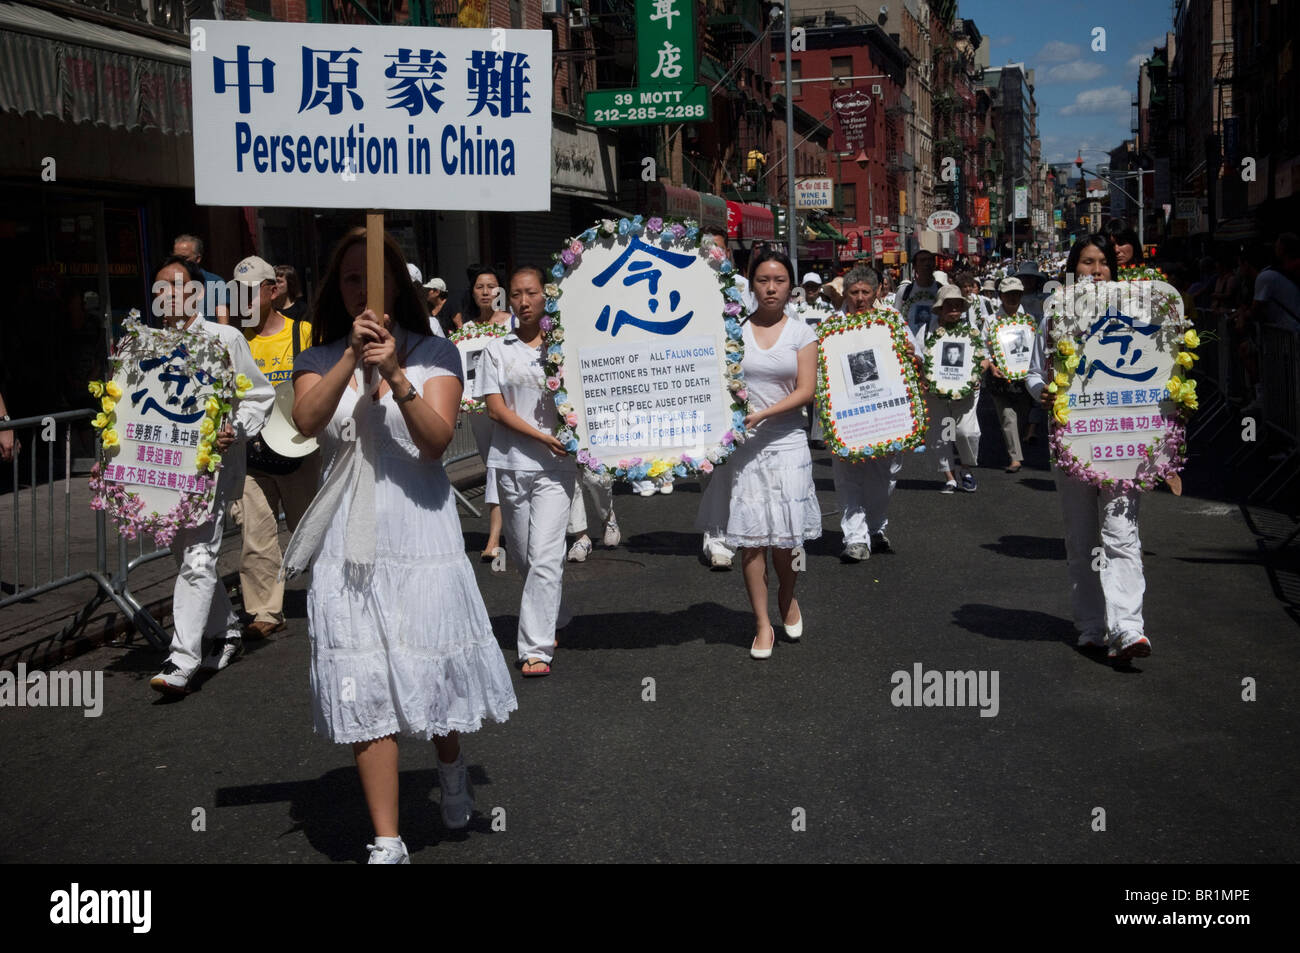 Members of Falun Dafa (Falun Gong) from around the world parade through the streets of Chinatown in New York Stock Photo